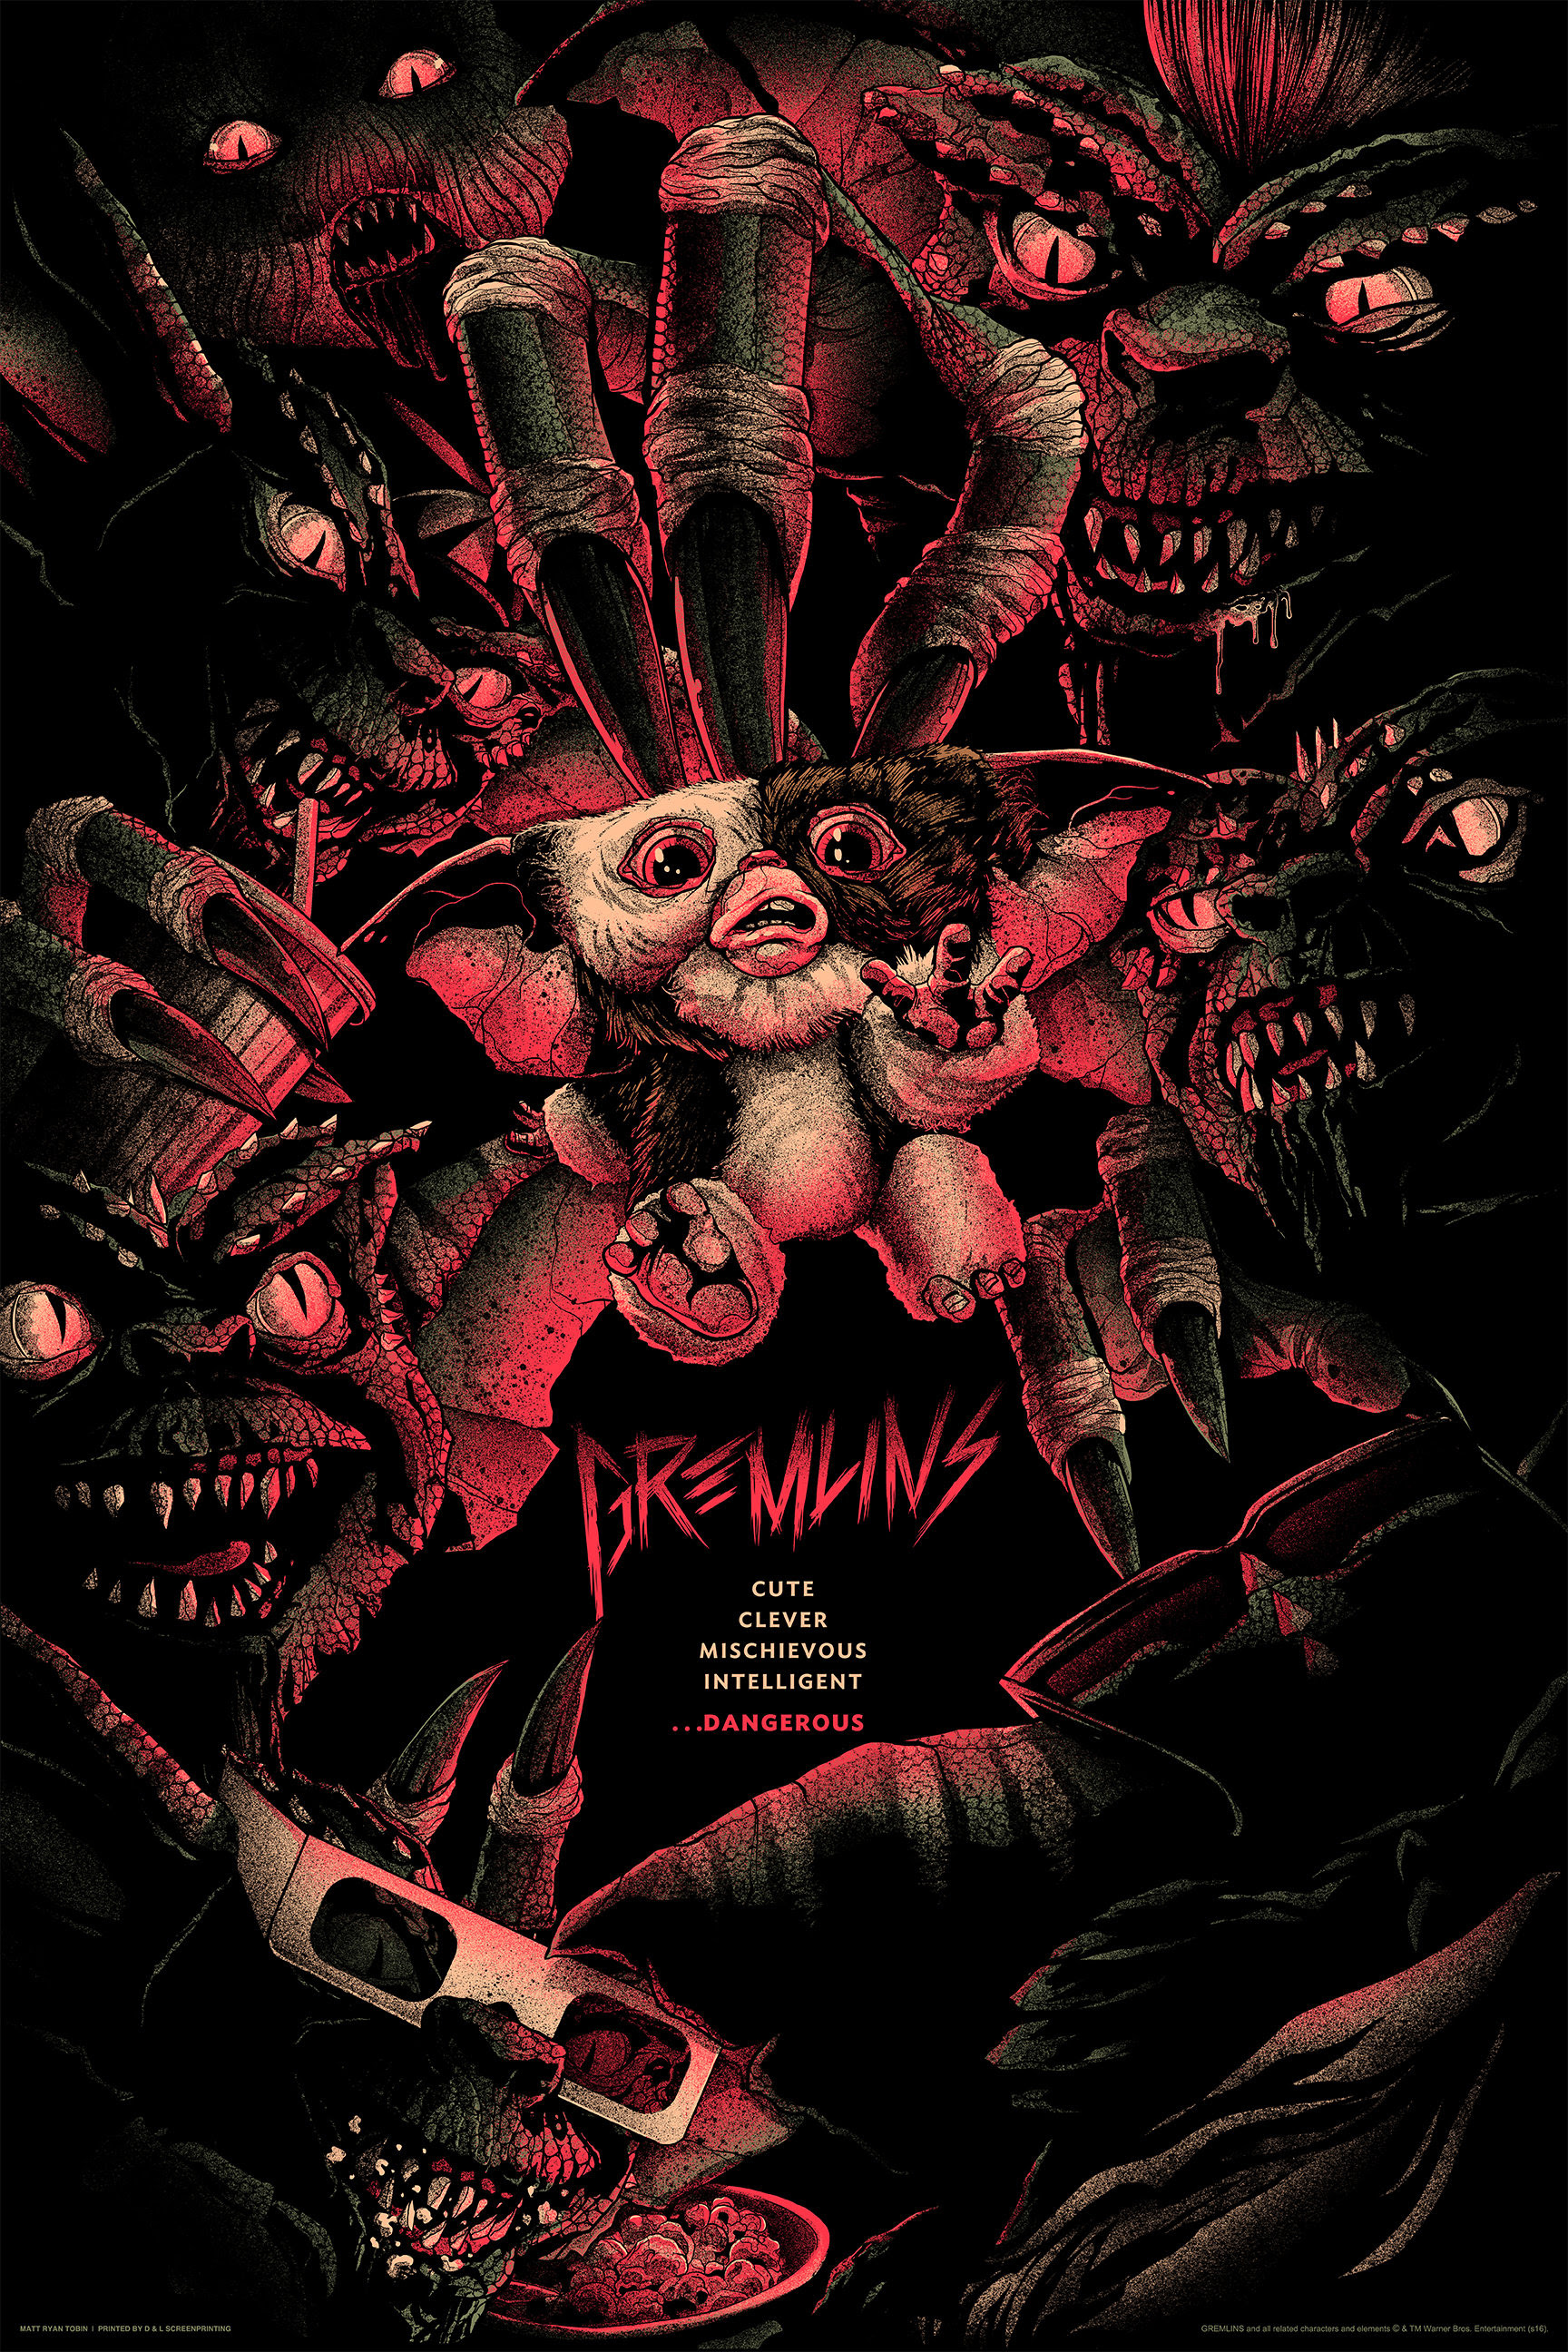 Gremlins by Matt Ryan Tobin. 24"x36" screen print. Hand numbered. Edition of 275. Printed by D&L Screenprinting. Expected to ship January 2017. $45